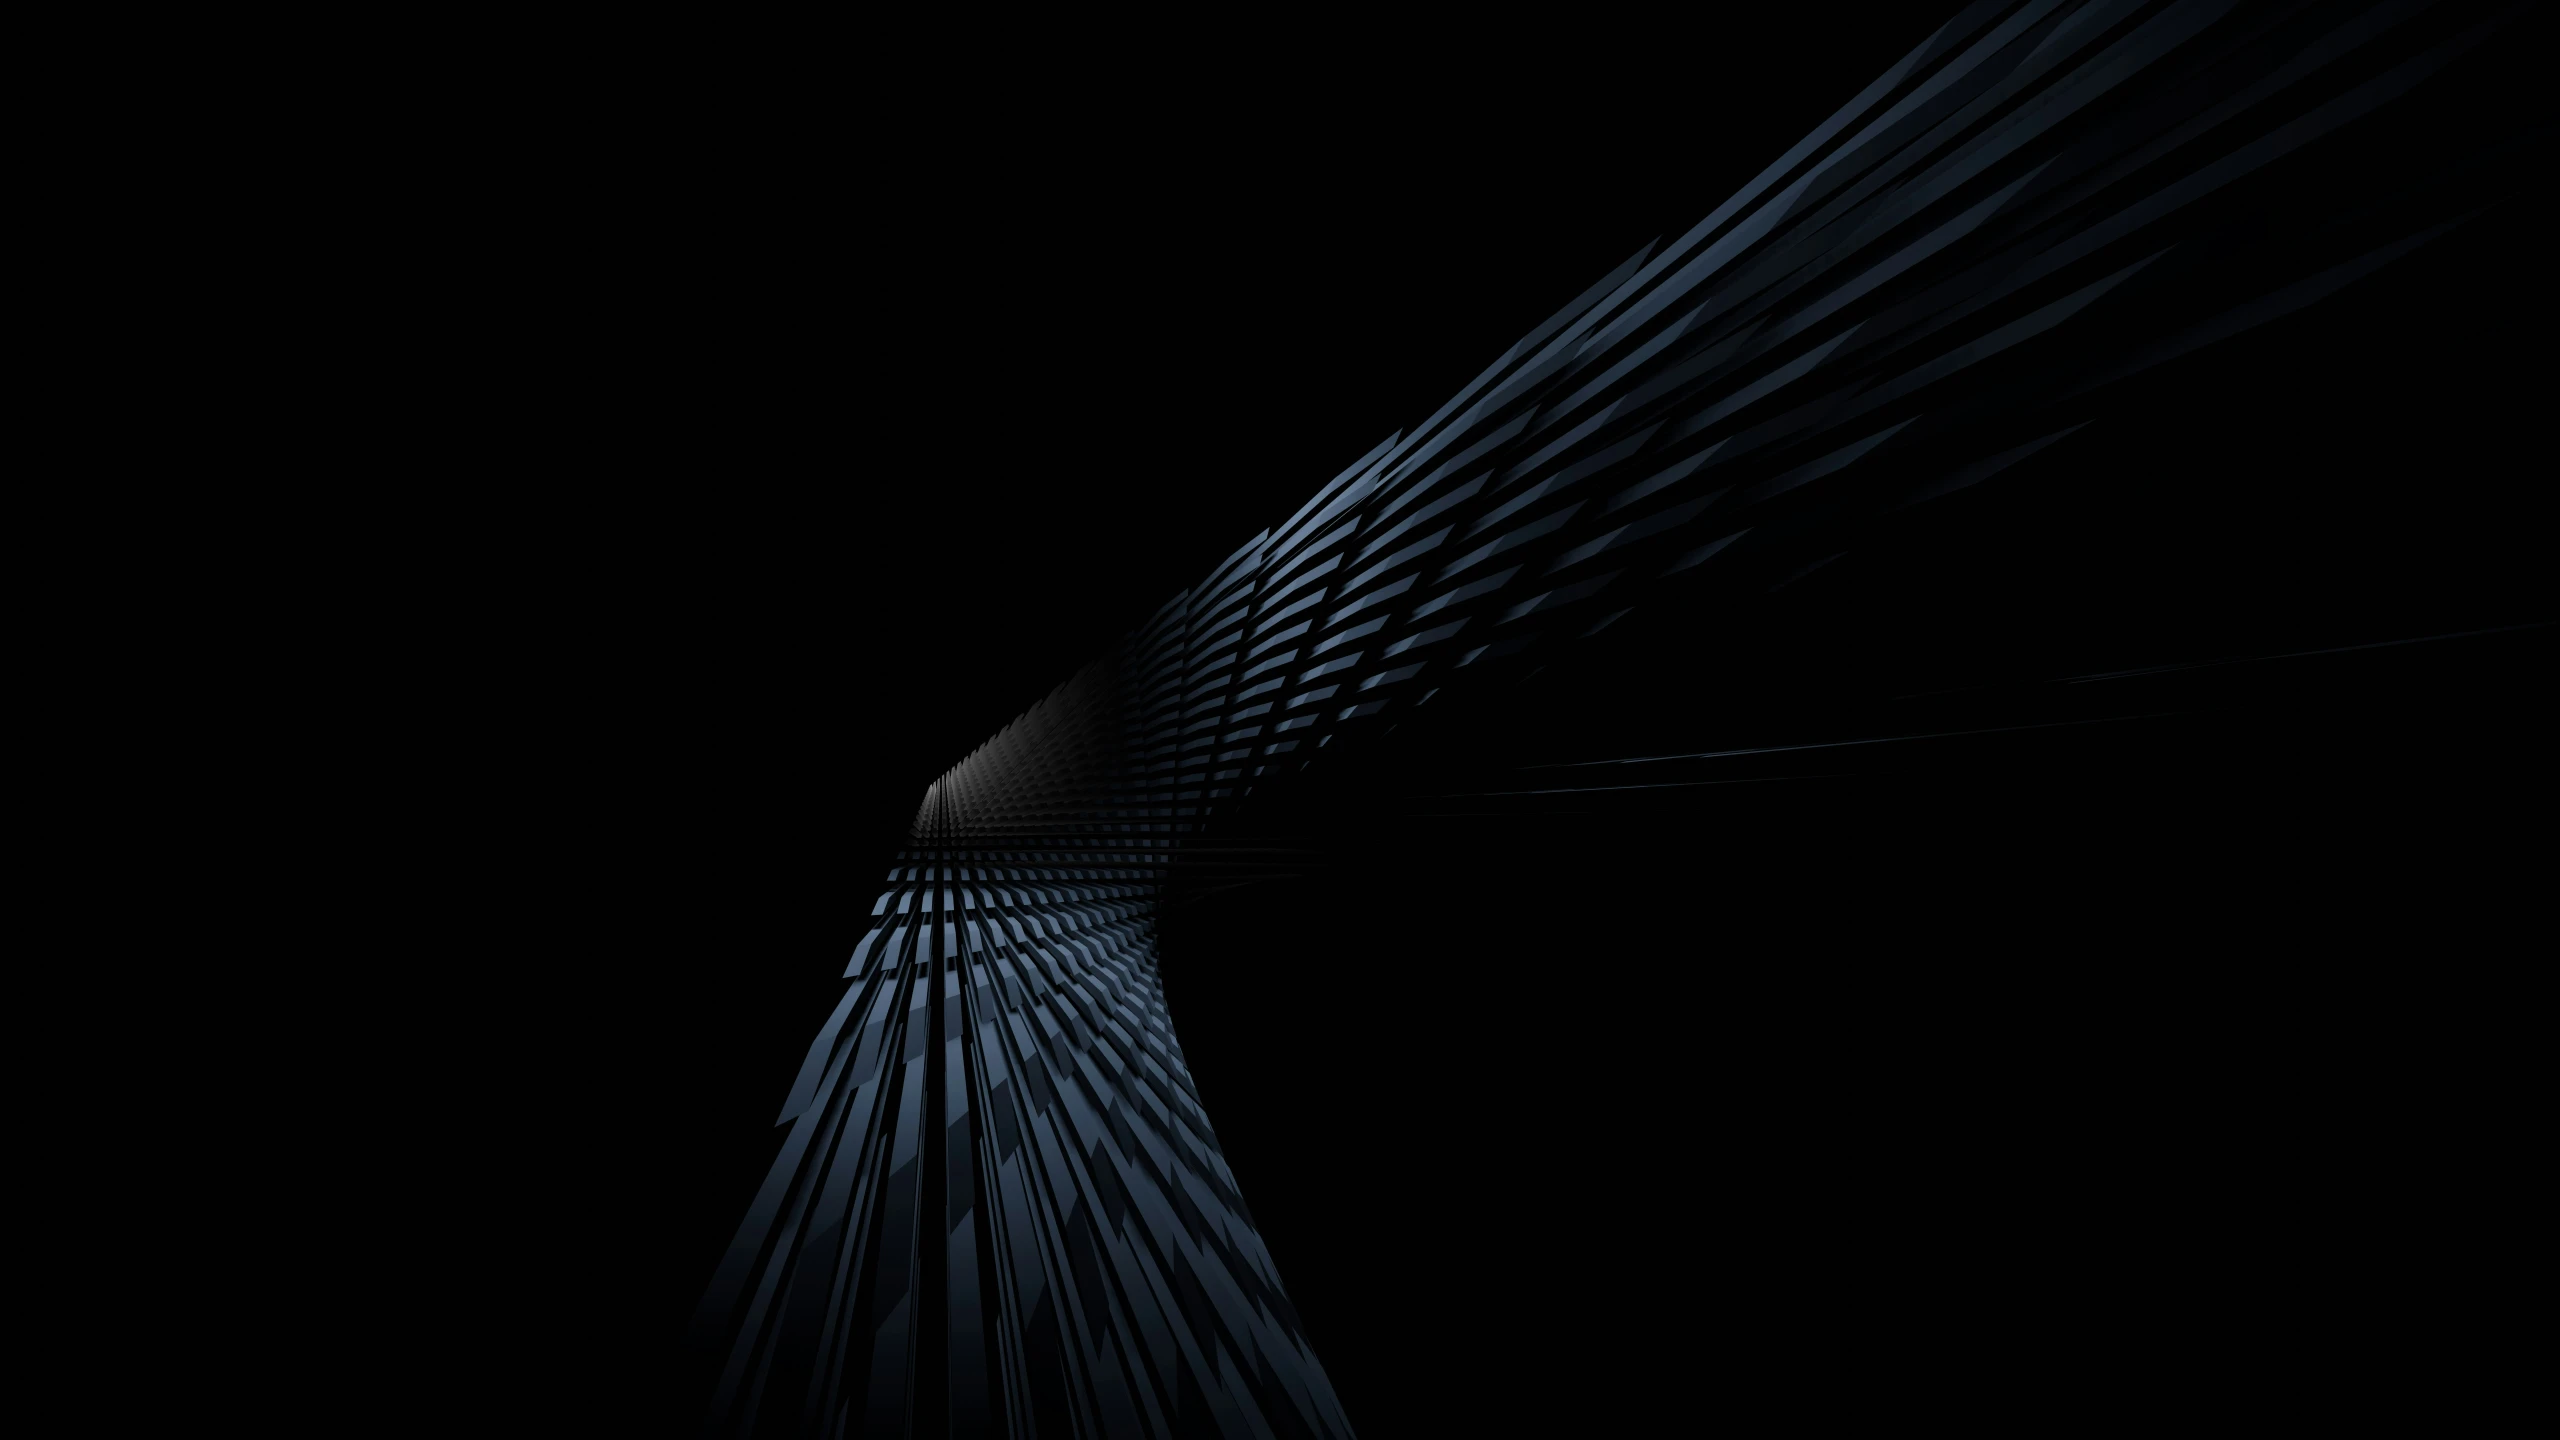 a dark abstract image with a very dark background